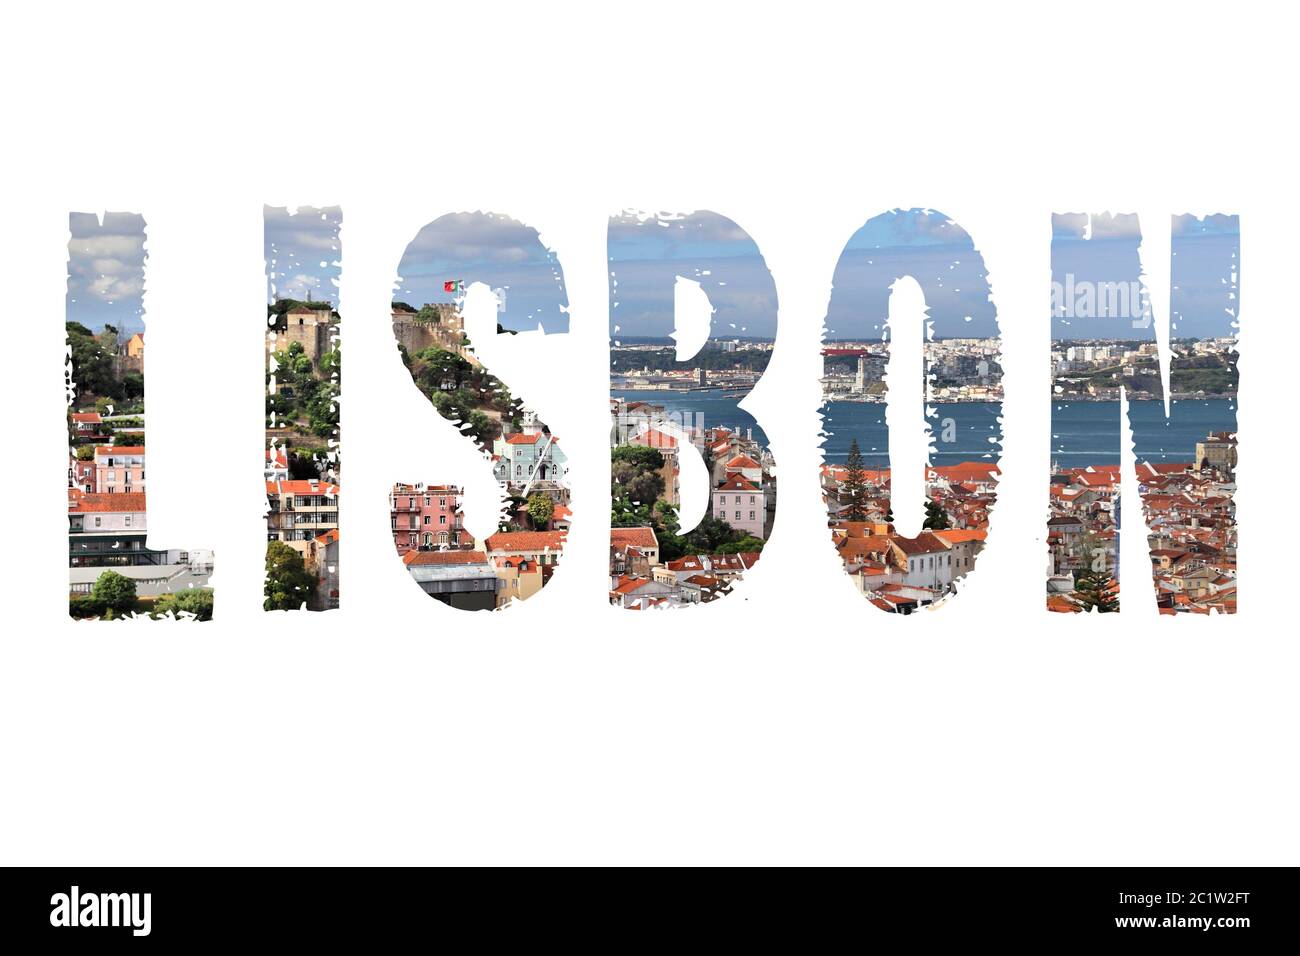 Lisbon text sign - Portugal capital city name with background travel postcard photo. Stock Photo